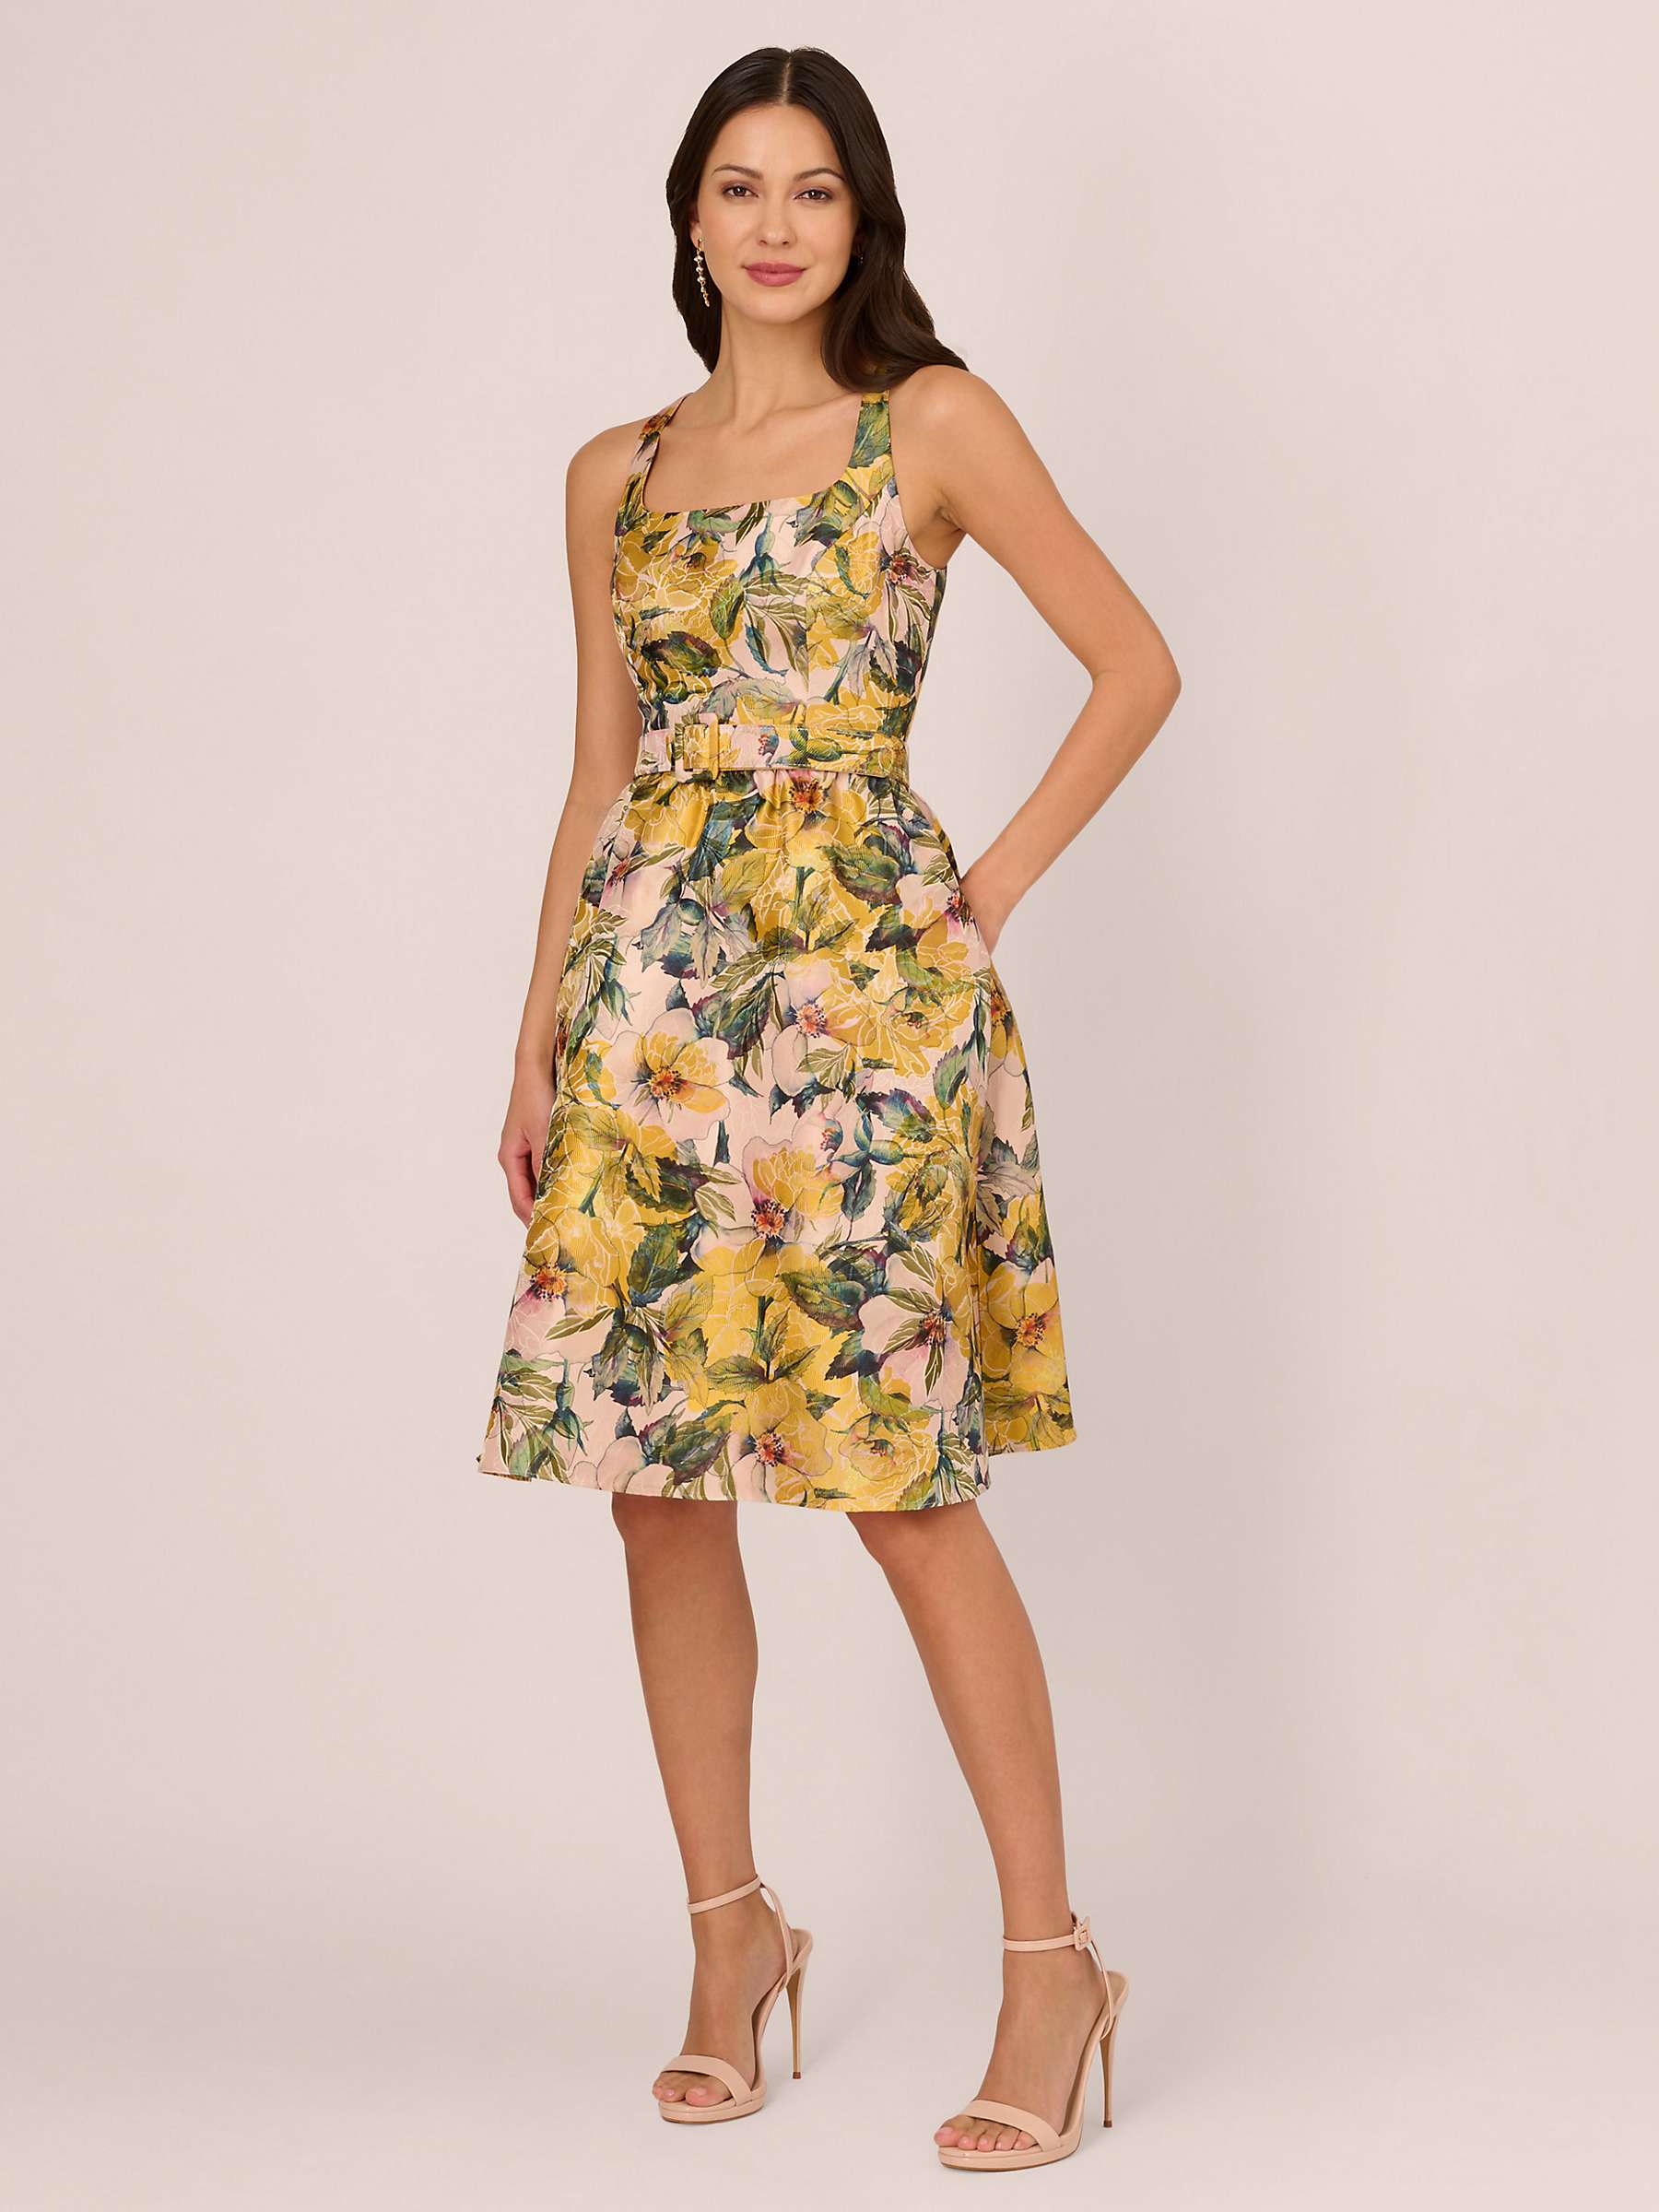 Buy Adrianna Papell Jacquard Floral Flared Dress, Yellow/Multi Online at johnlewis.com